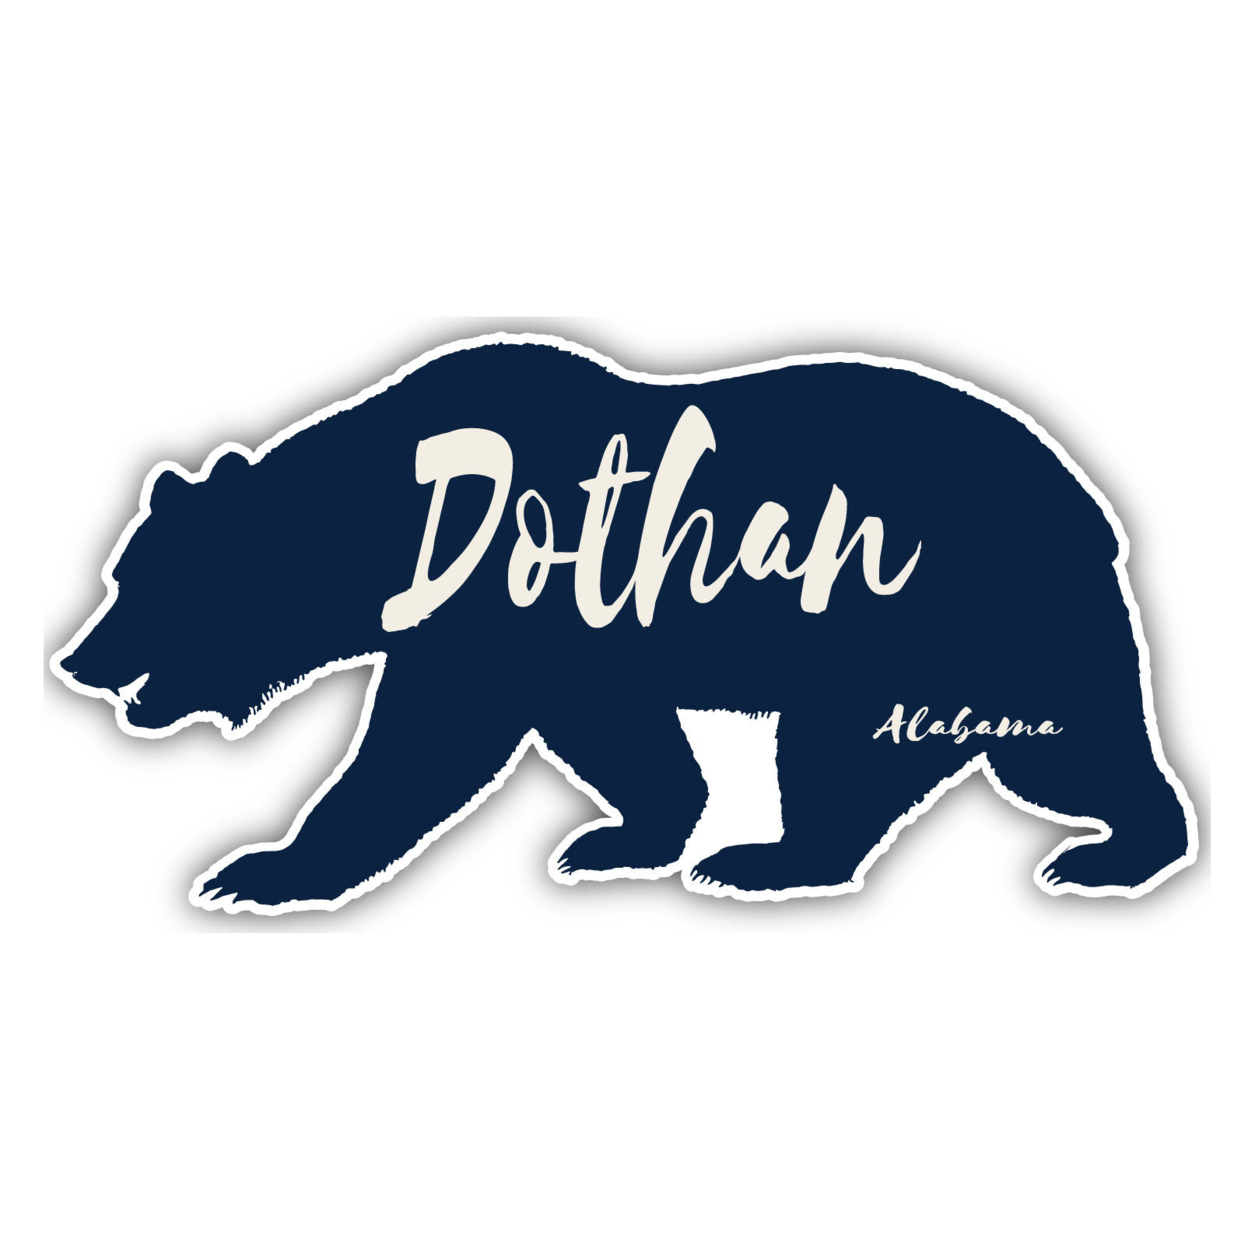 Dothan Alabama Souvenir Decorative Stickers (Choose Theme And Size) - 4-Pack, 10-Inch, Tent